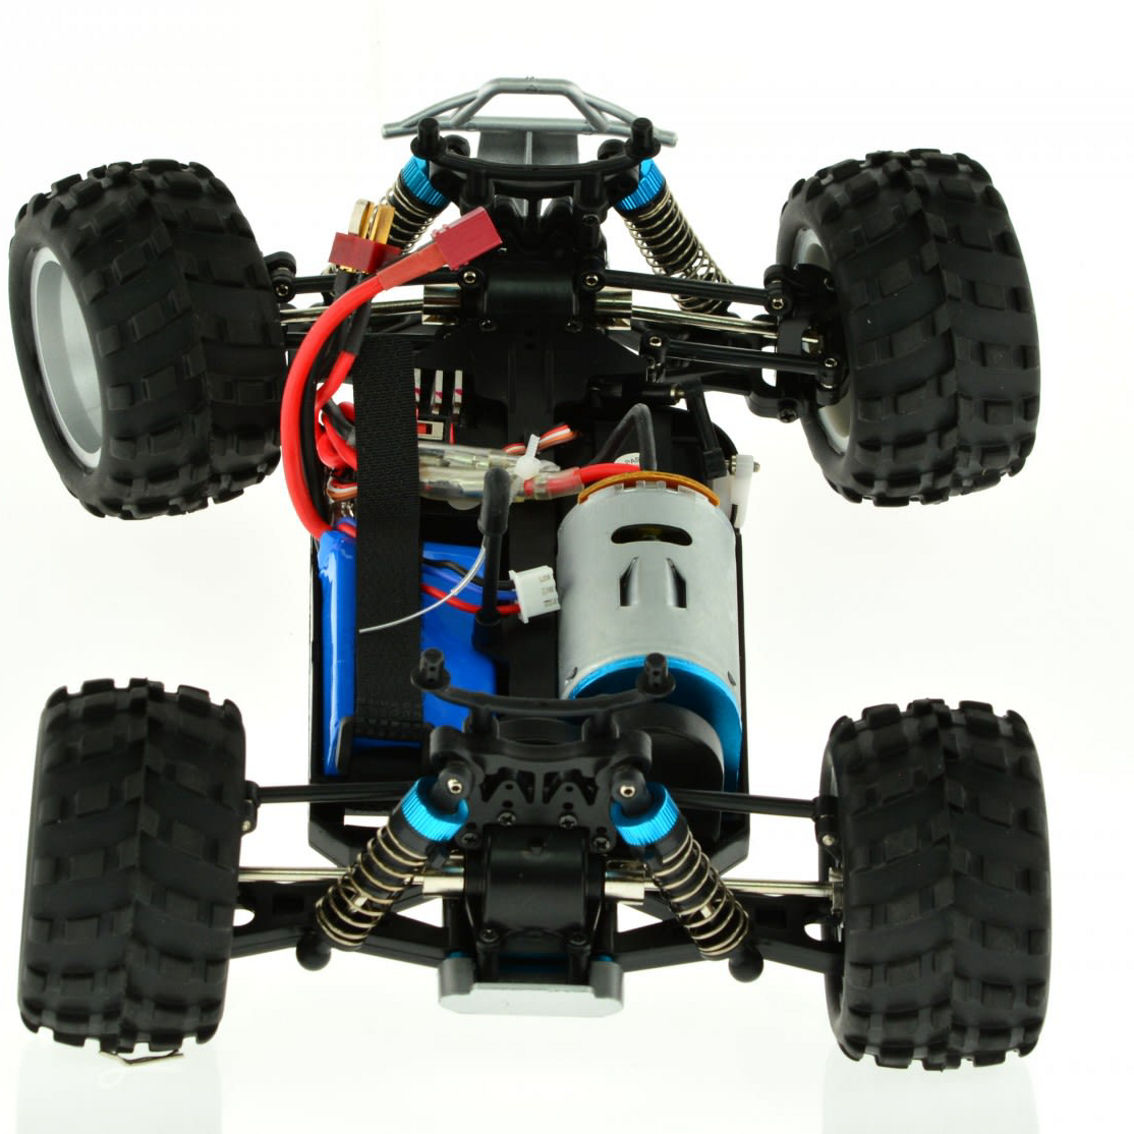 CIS-A979-B 1:16 scale monster truck with 450 feet range 45 MPH speed - Image 5 of 5